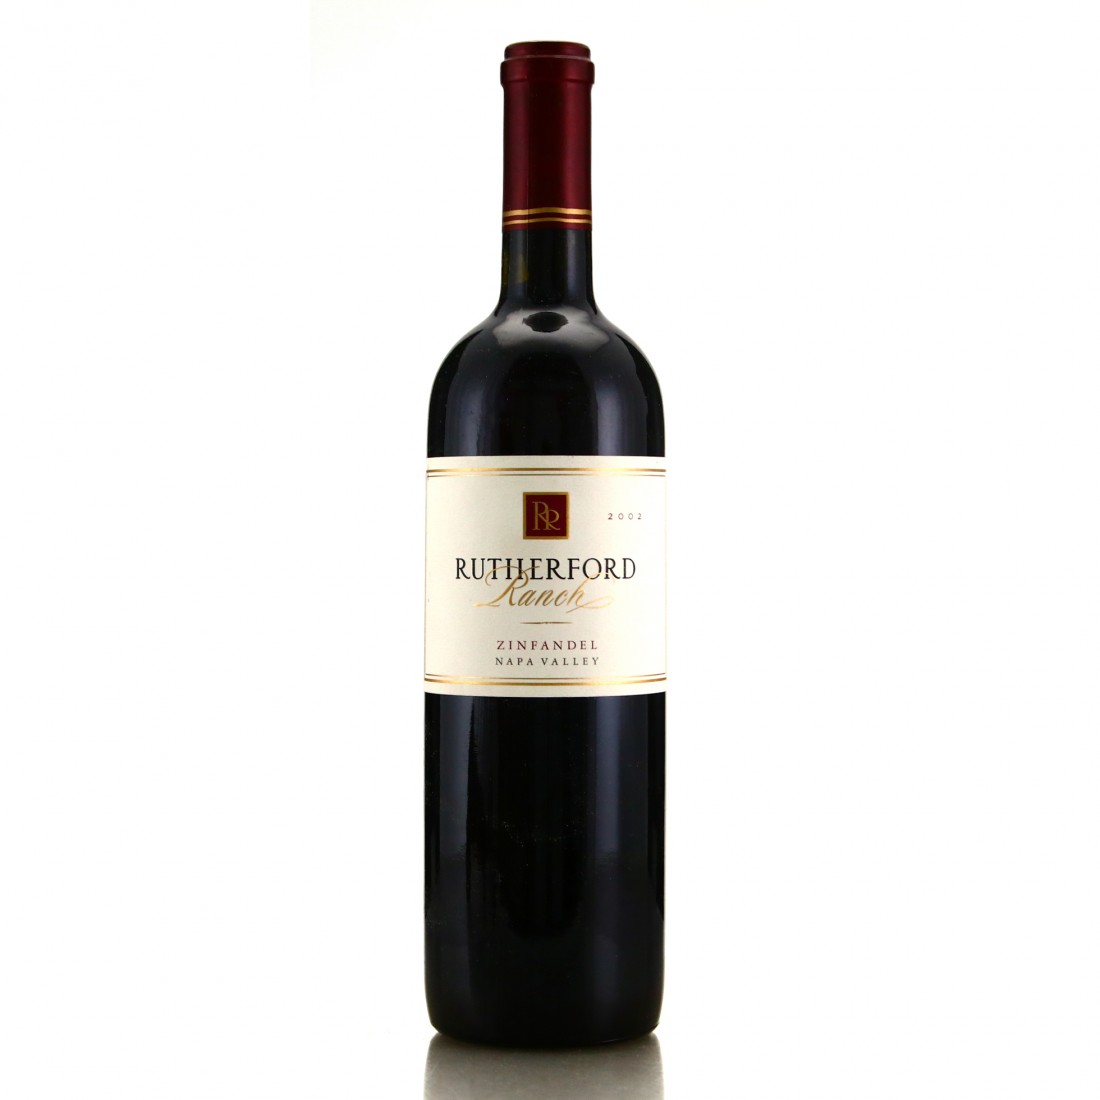 Bottle of Rutherford Ranch Zinfandel from search results